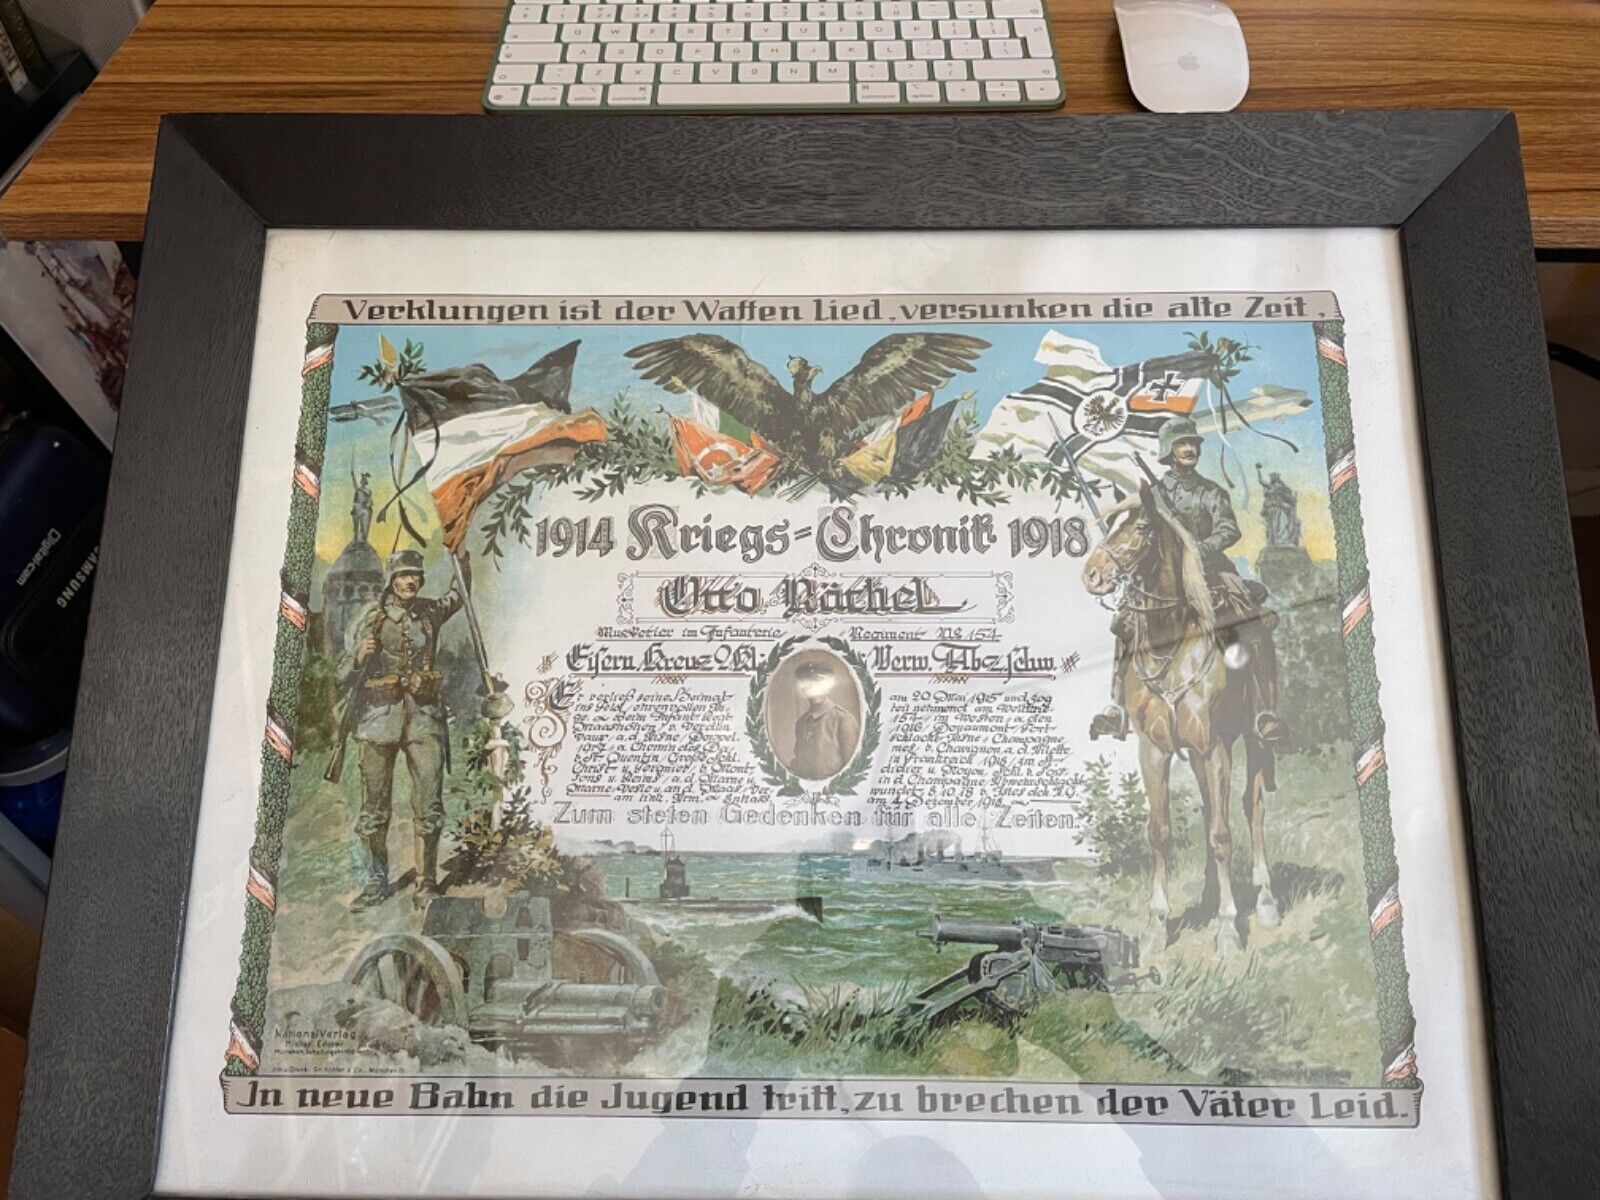 or 'german armyWorld War 1 , soldiers war chronicle and certificate of service.'